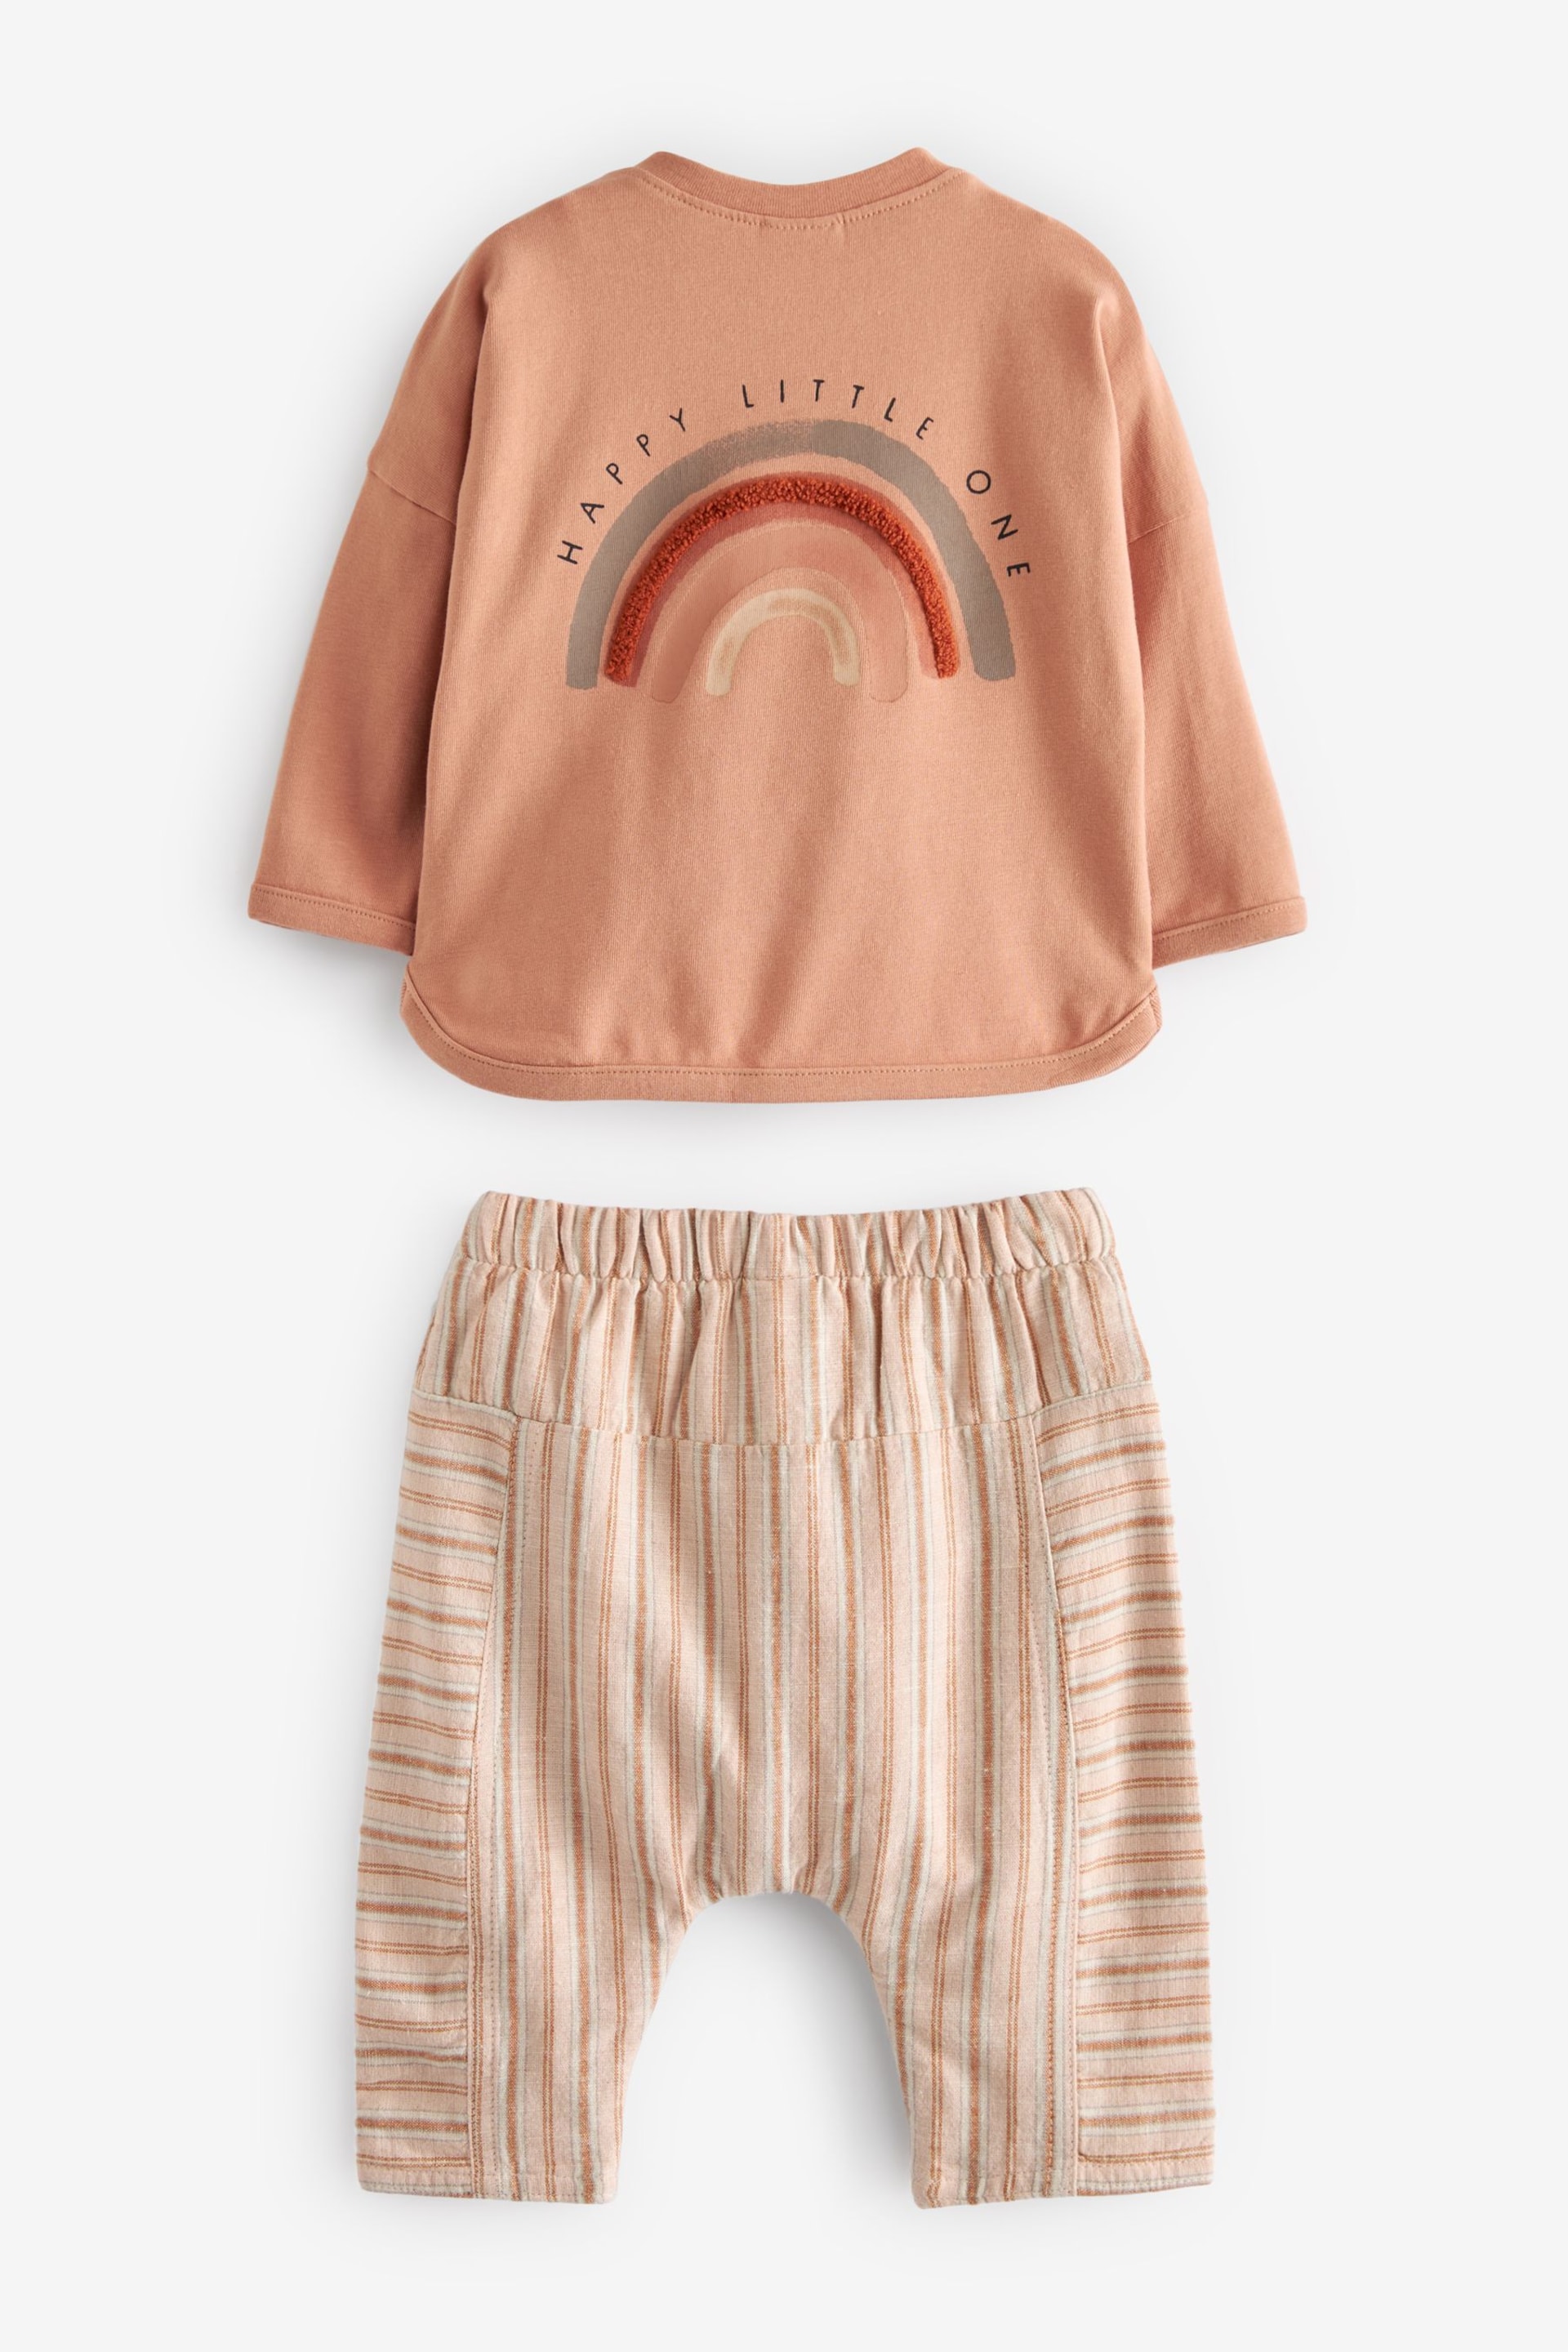 Rust Brown Baby Top And Leggings Set (0mths-3yrs) - Image 6 of 7